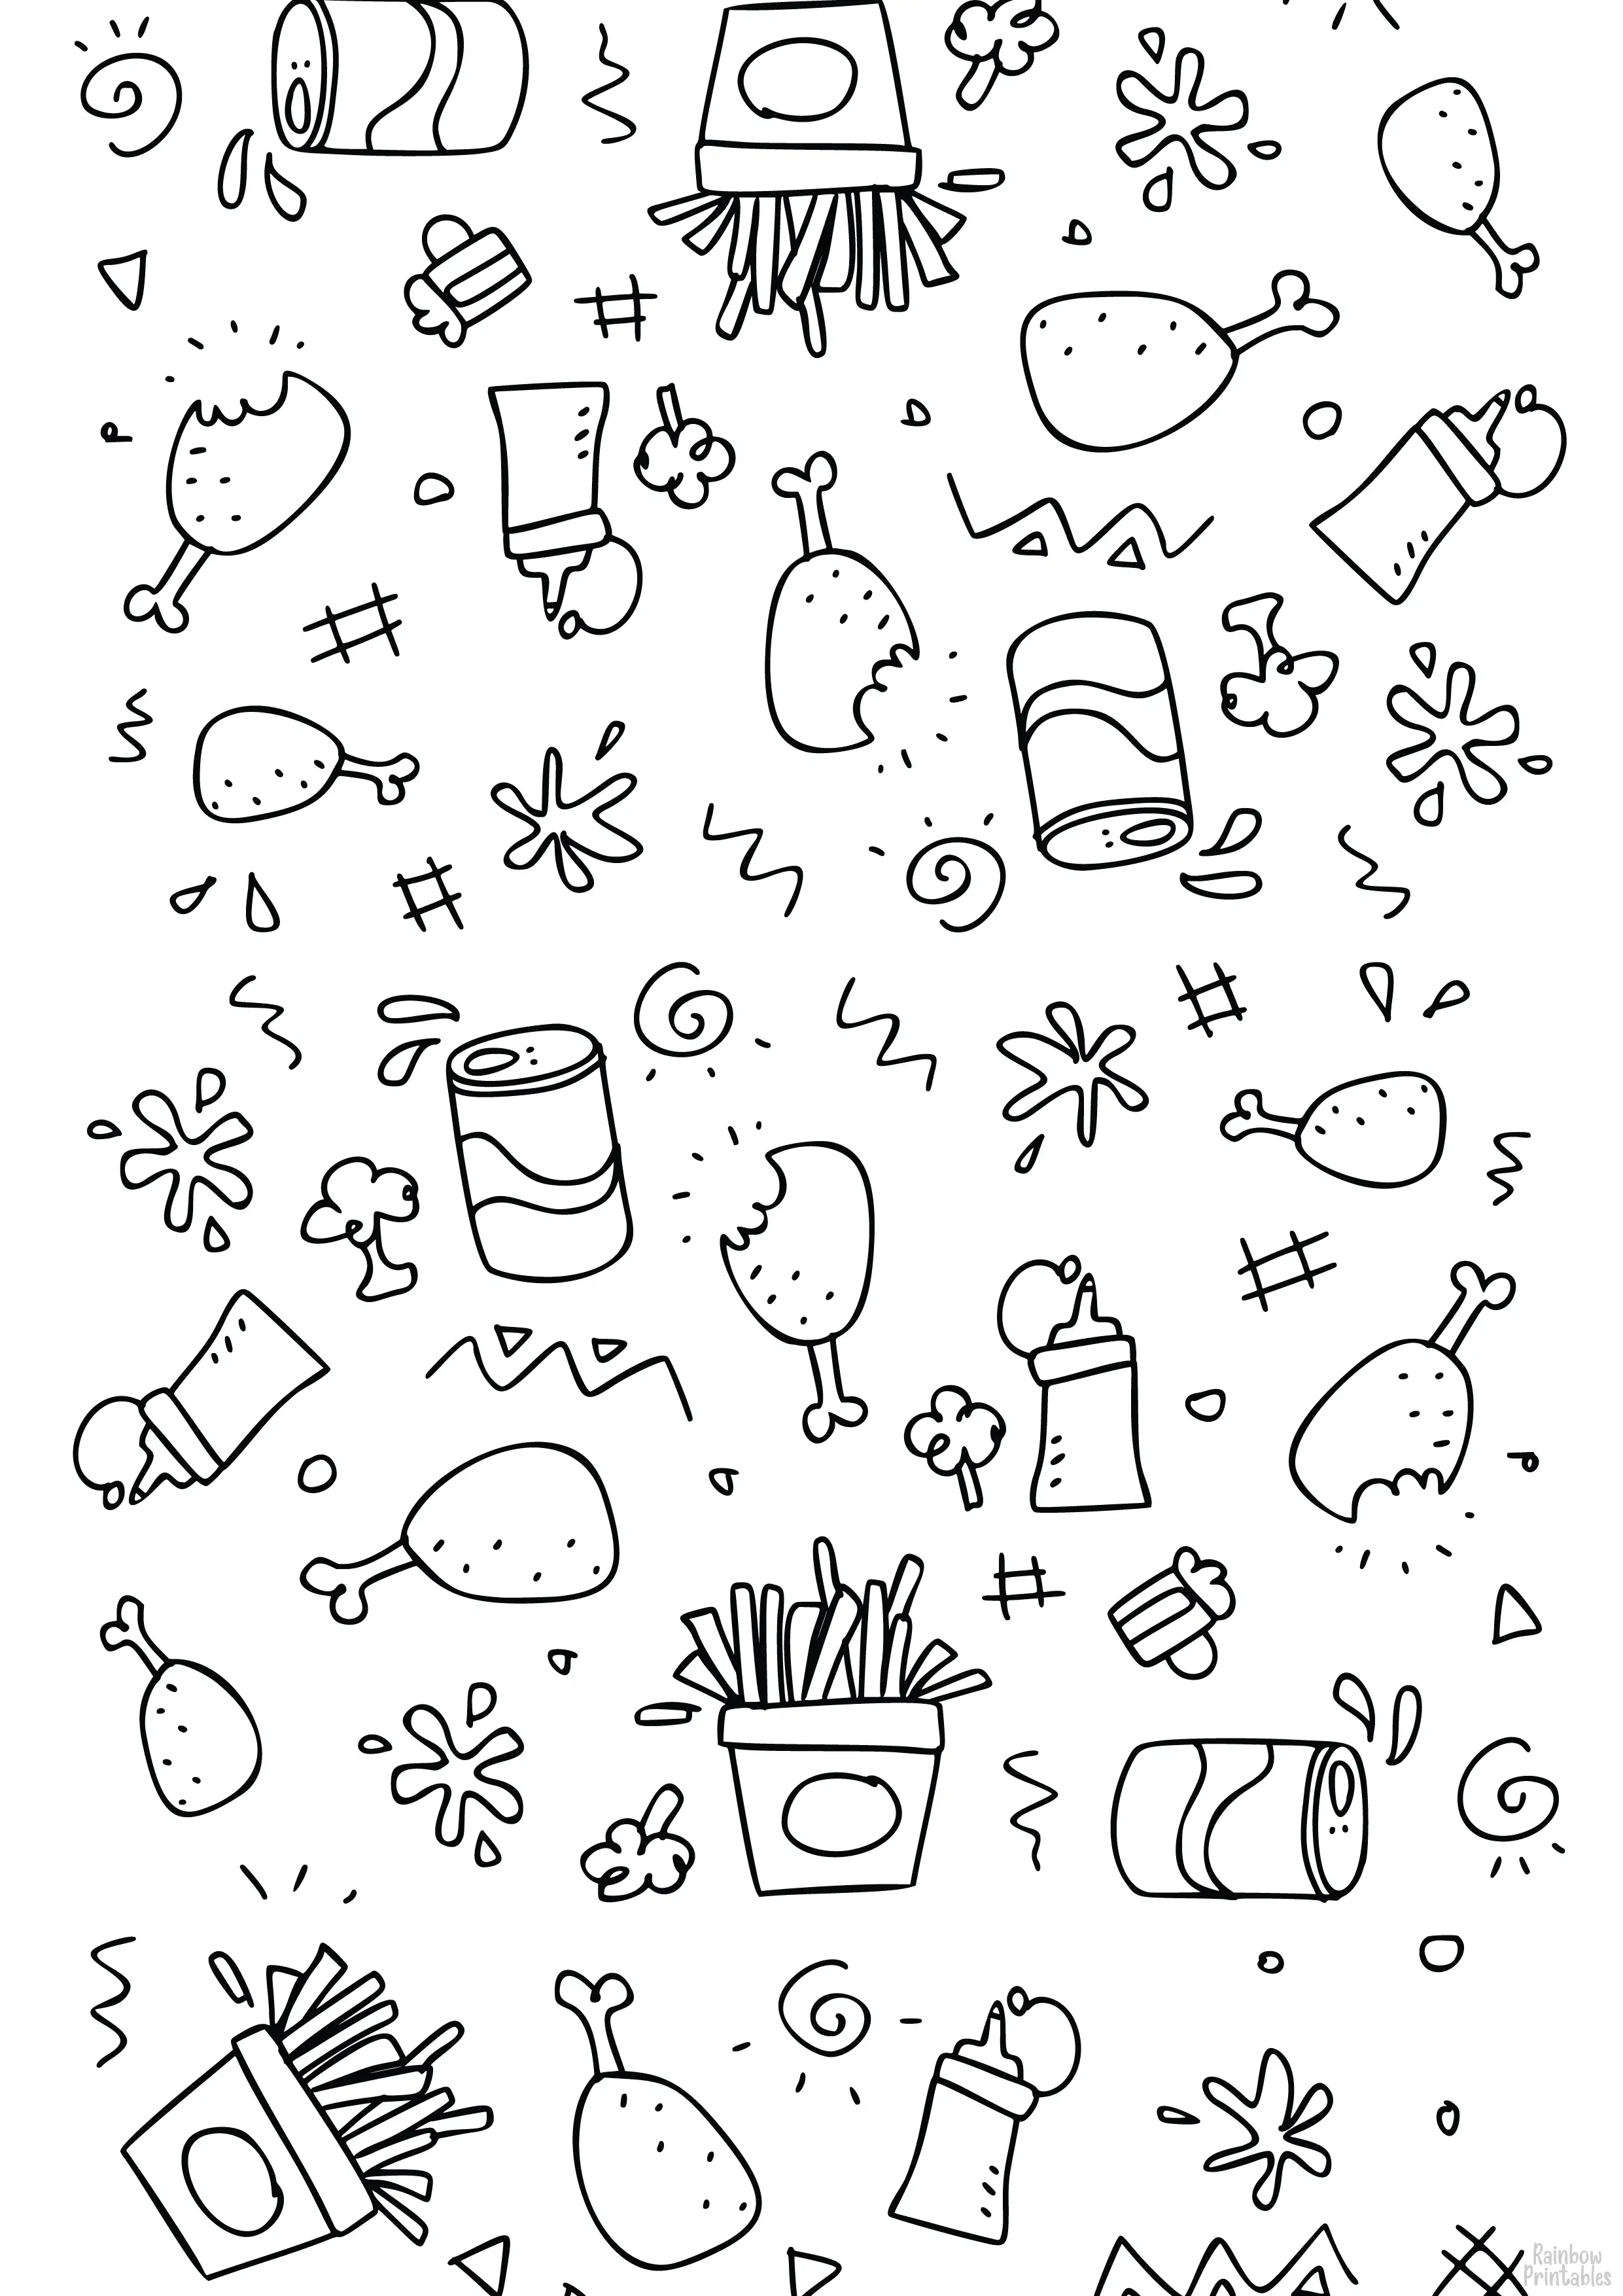 FAST FOOD CHICKEN FRIES Clipart Pattern Food Vine Clipart Coloring Pages Line Art Drawings for Kids-01